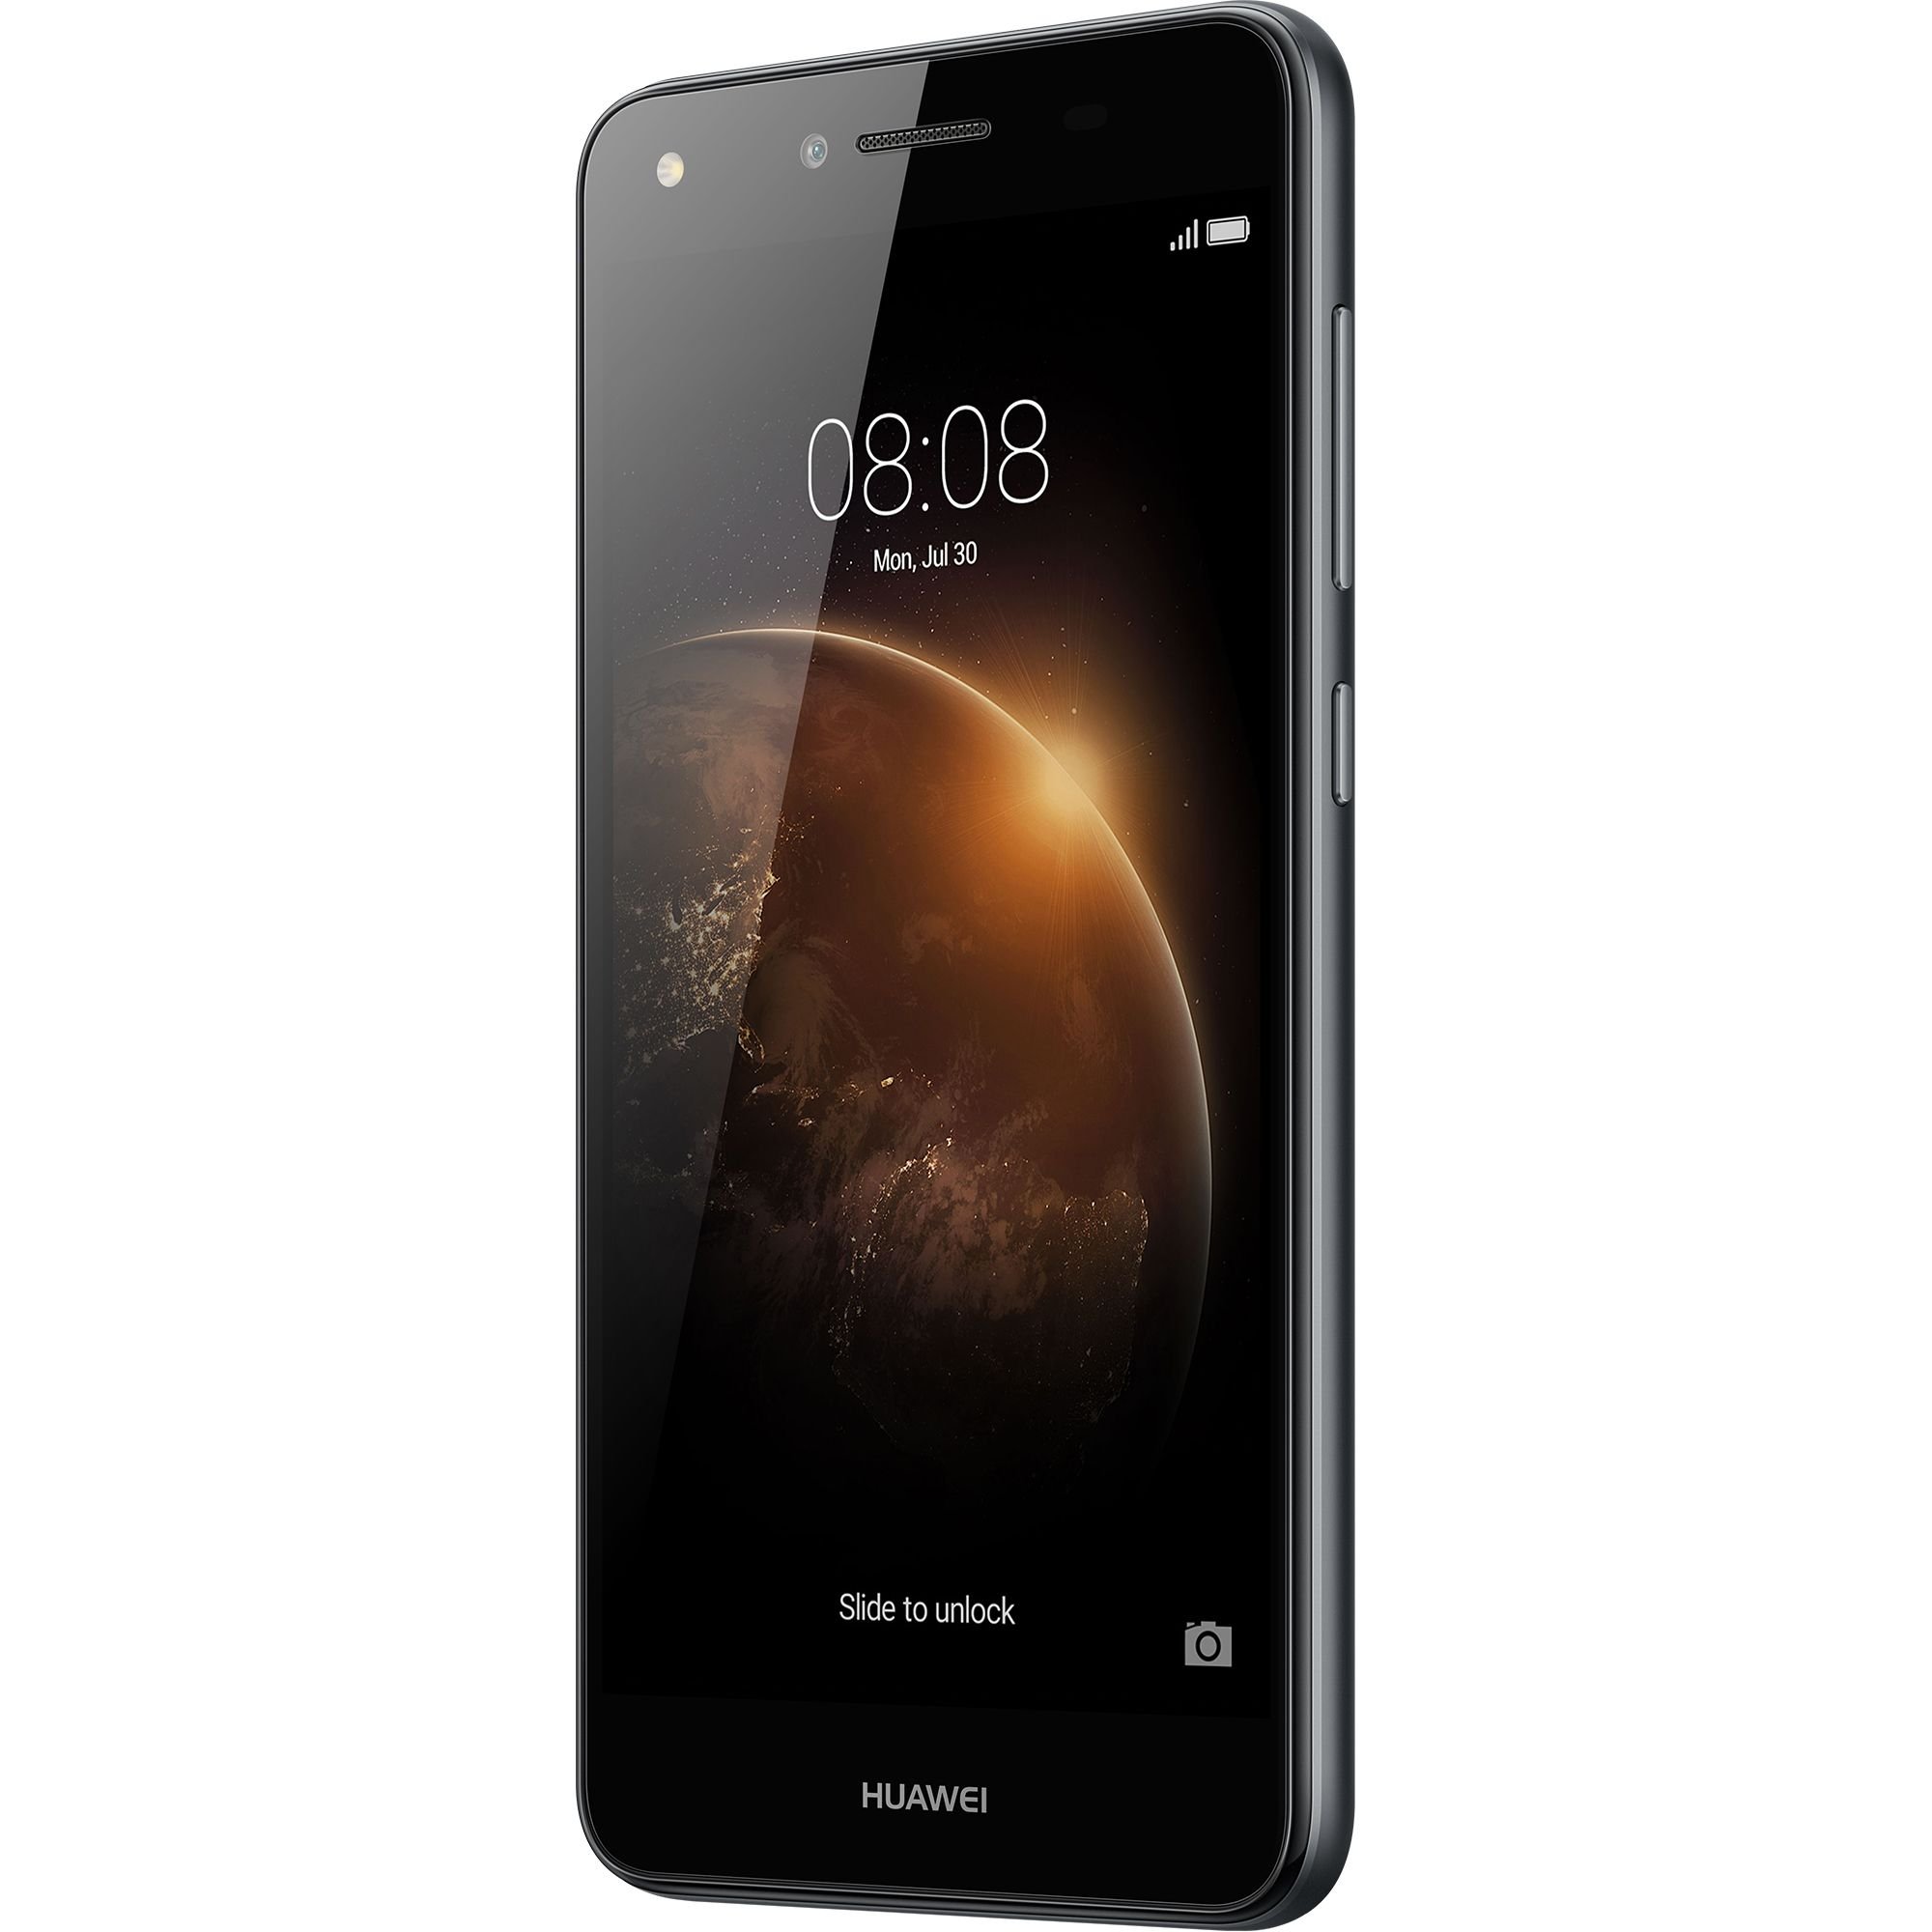 George Eliot Symmetrie T Huawei Y6II Compact specs, review, release date - PhonesData